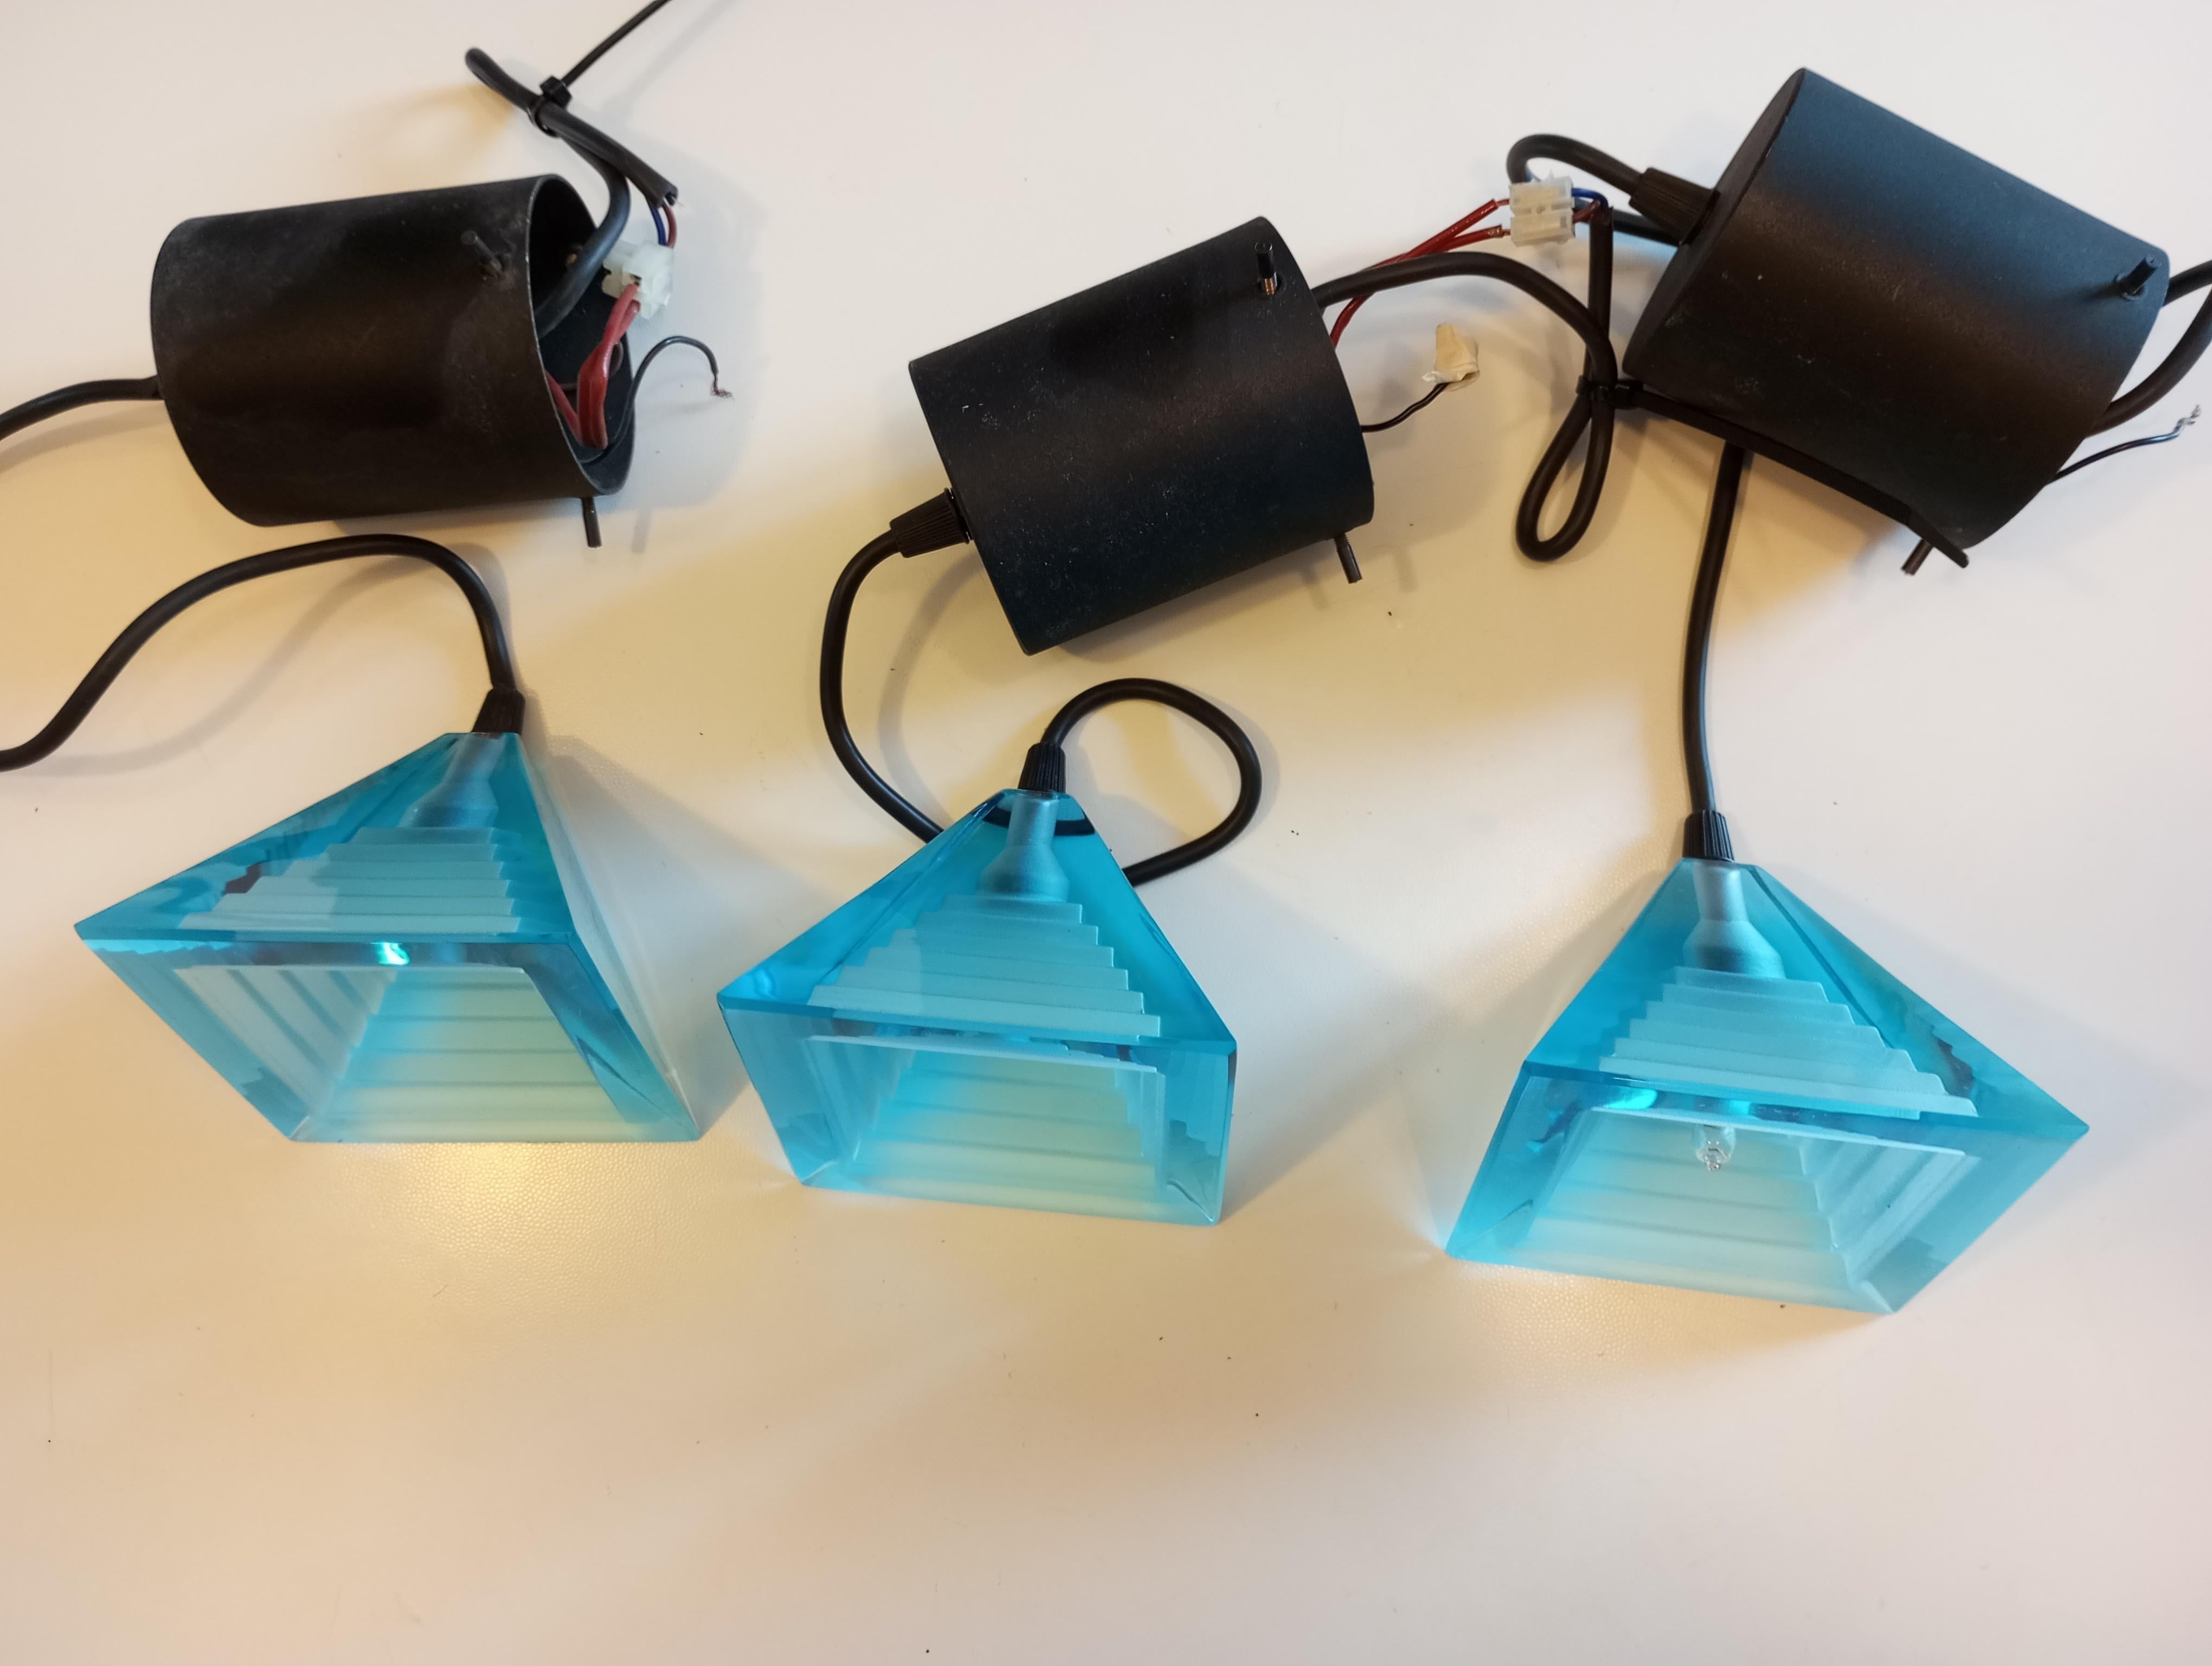 Three blue 'Pyramid' lamps designed by Paolo Piva for Mazzega - Murano glass For Sale 3